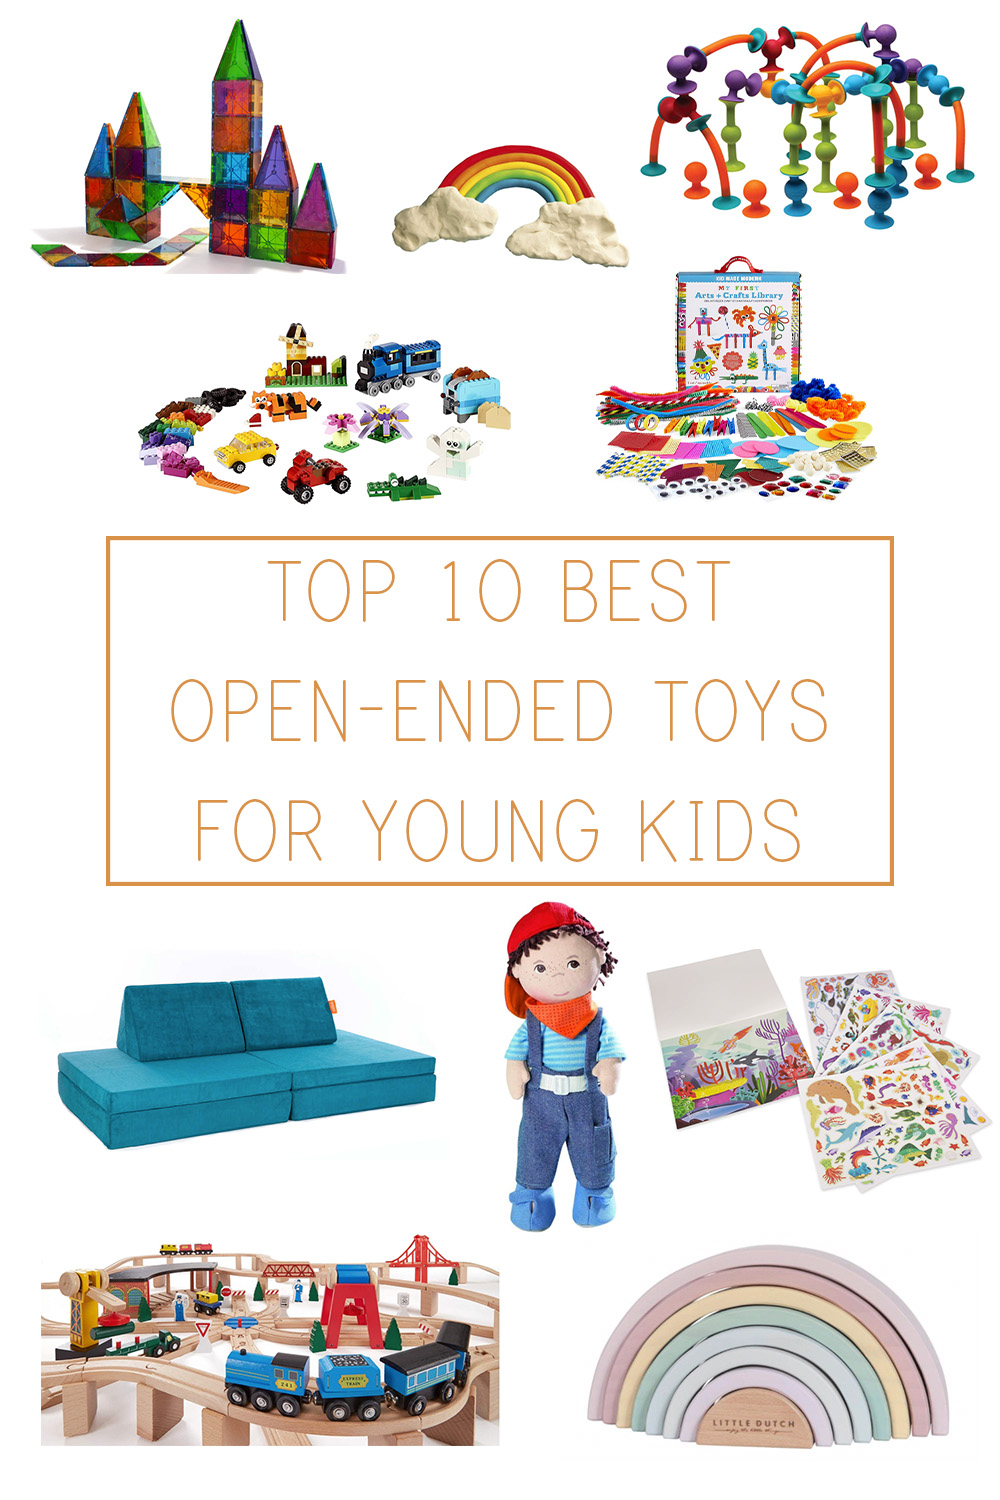 Top 10 Best Open-Ended Toys for Young Kids